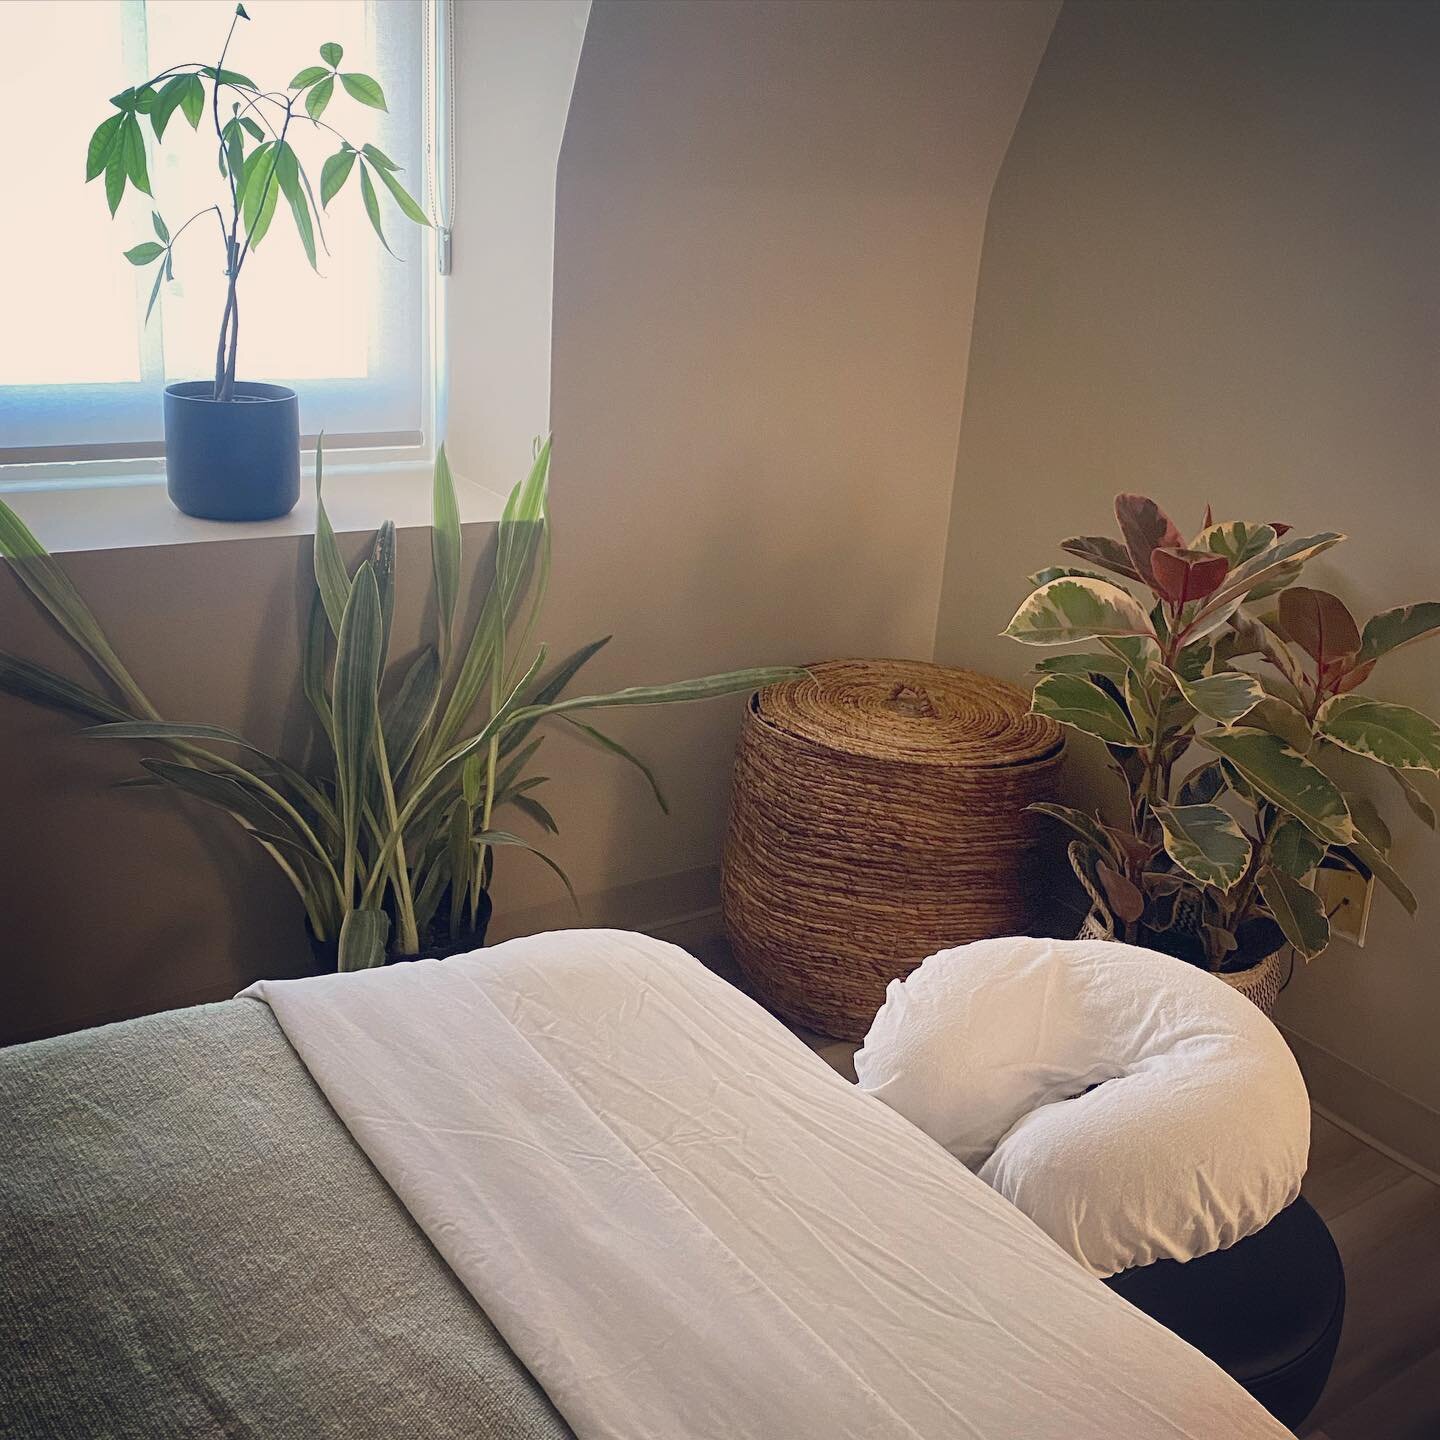 My favourite place to be. 

#guelphmassage #massagetherapy #mobilemassage #guelphrmt #guelphmassagetherapy #rmt #downtownguelph #guelphmassagetherapist #selfcare